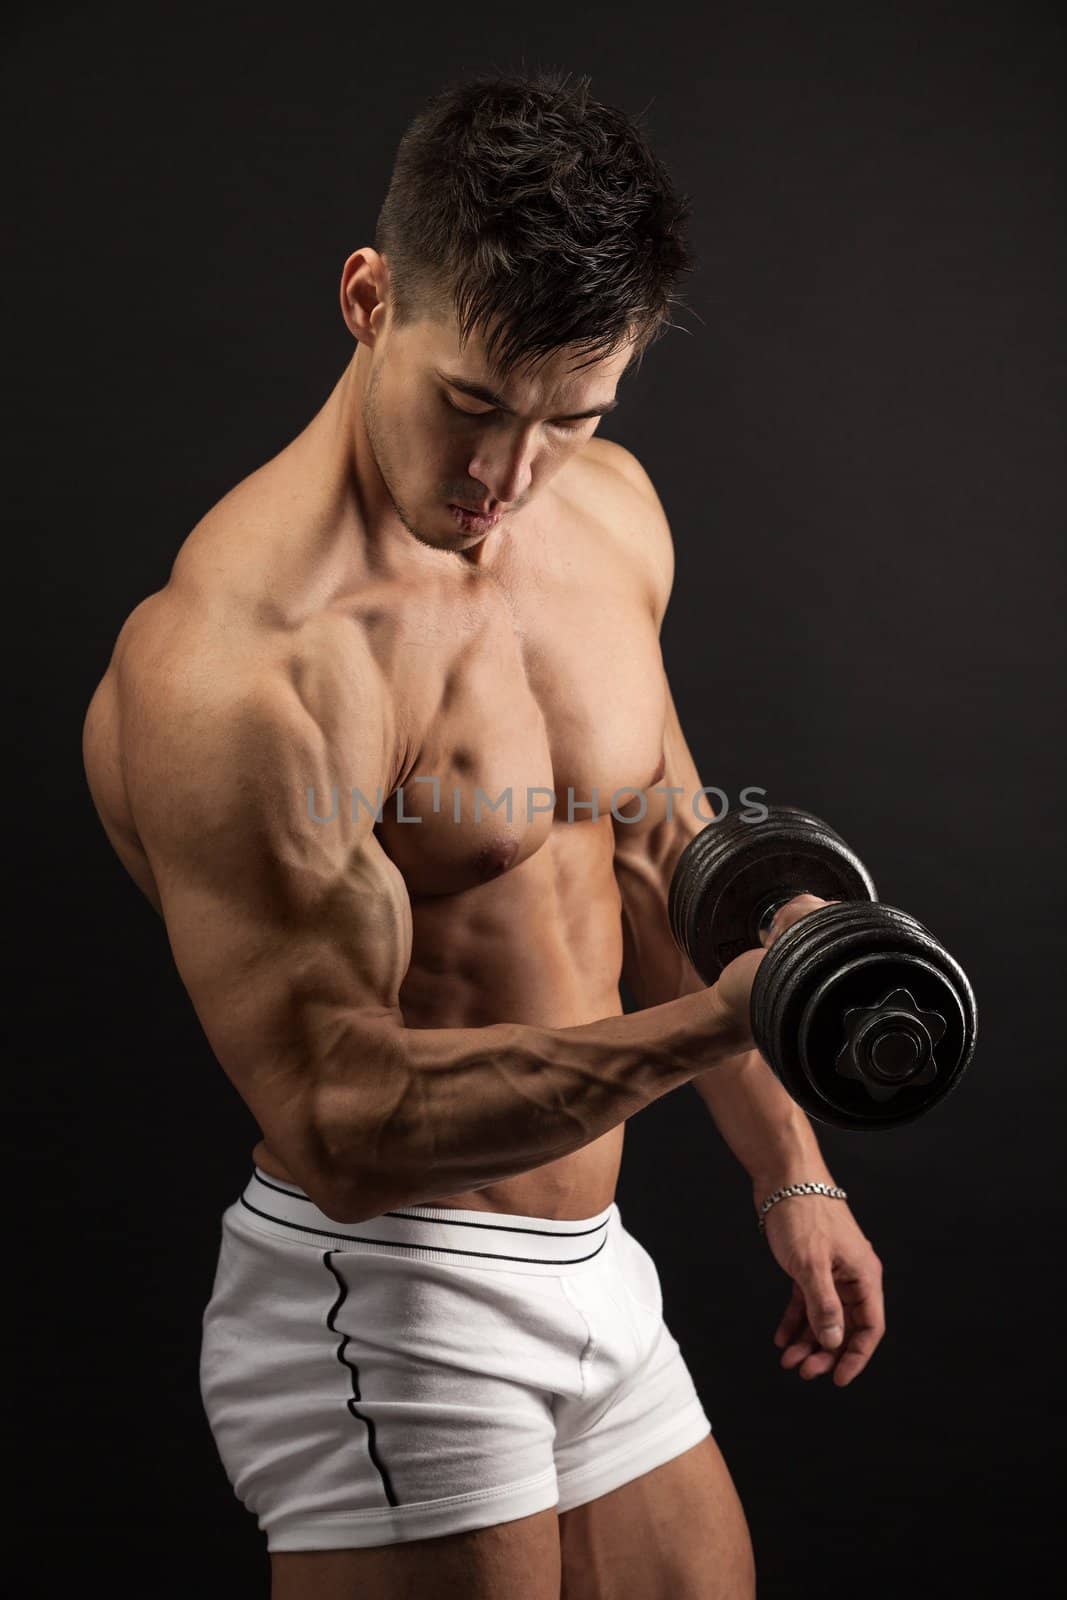 Muscular young man lifting a dumbbell over black background